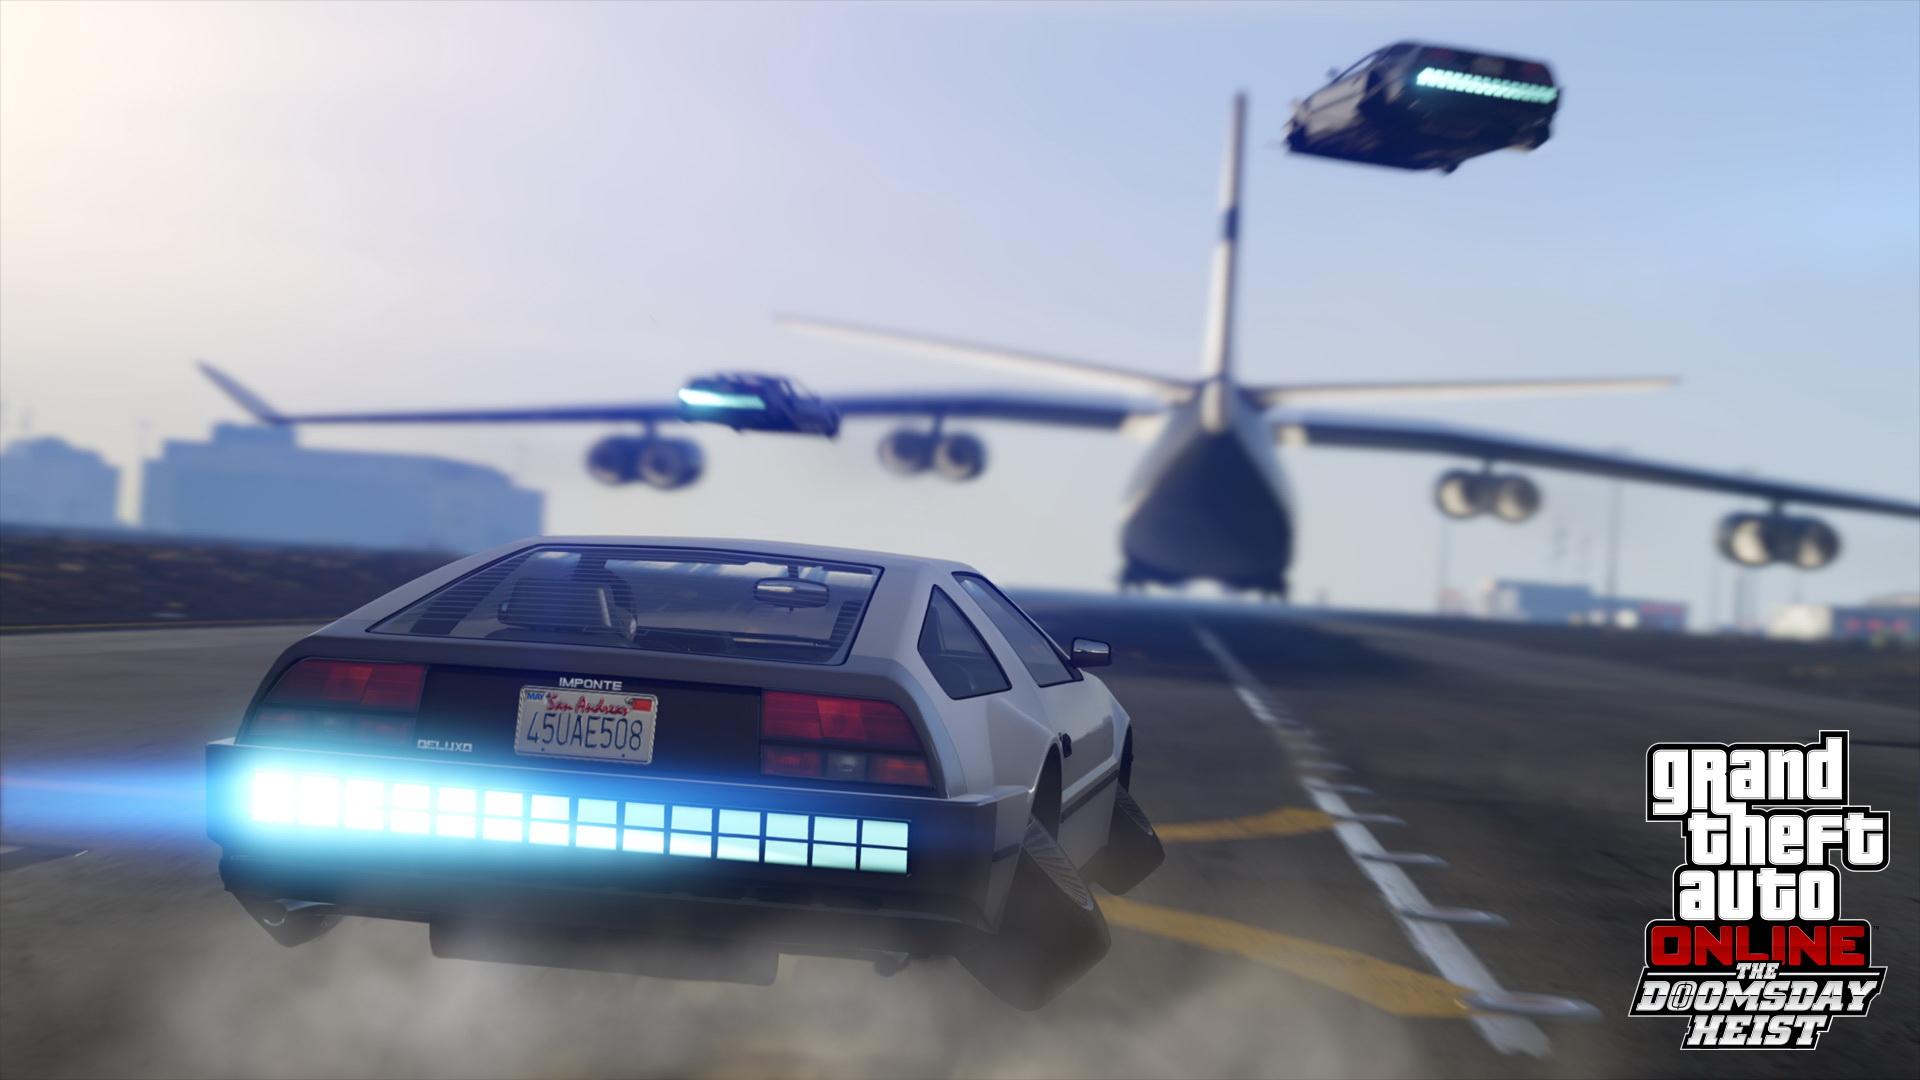 Screenshot №1 from game Grand Theft Auto V